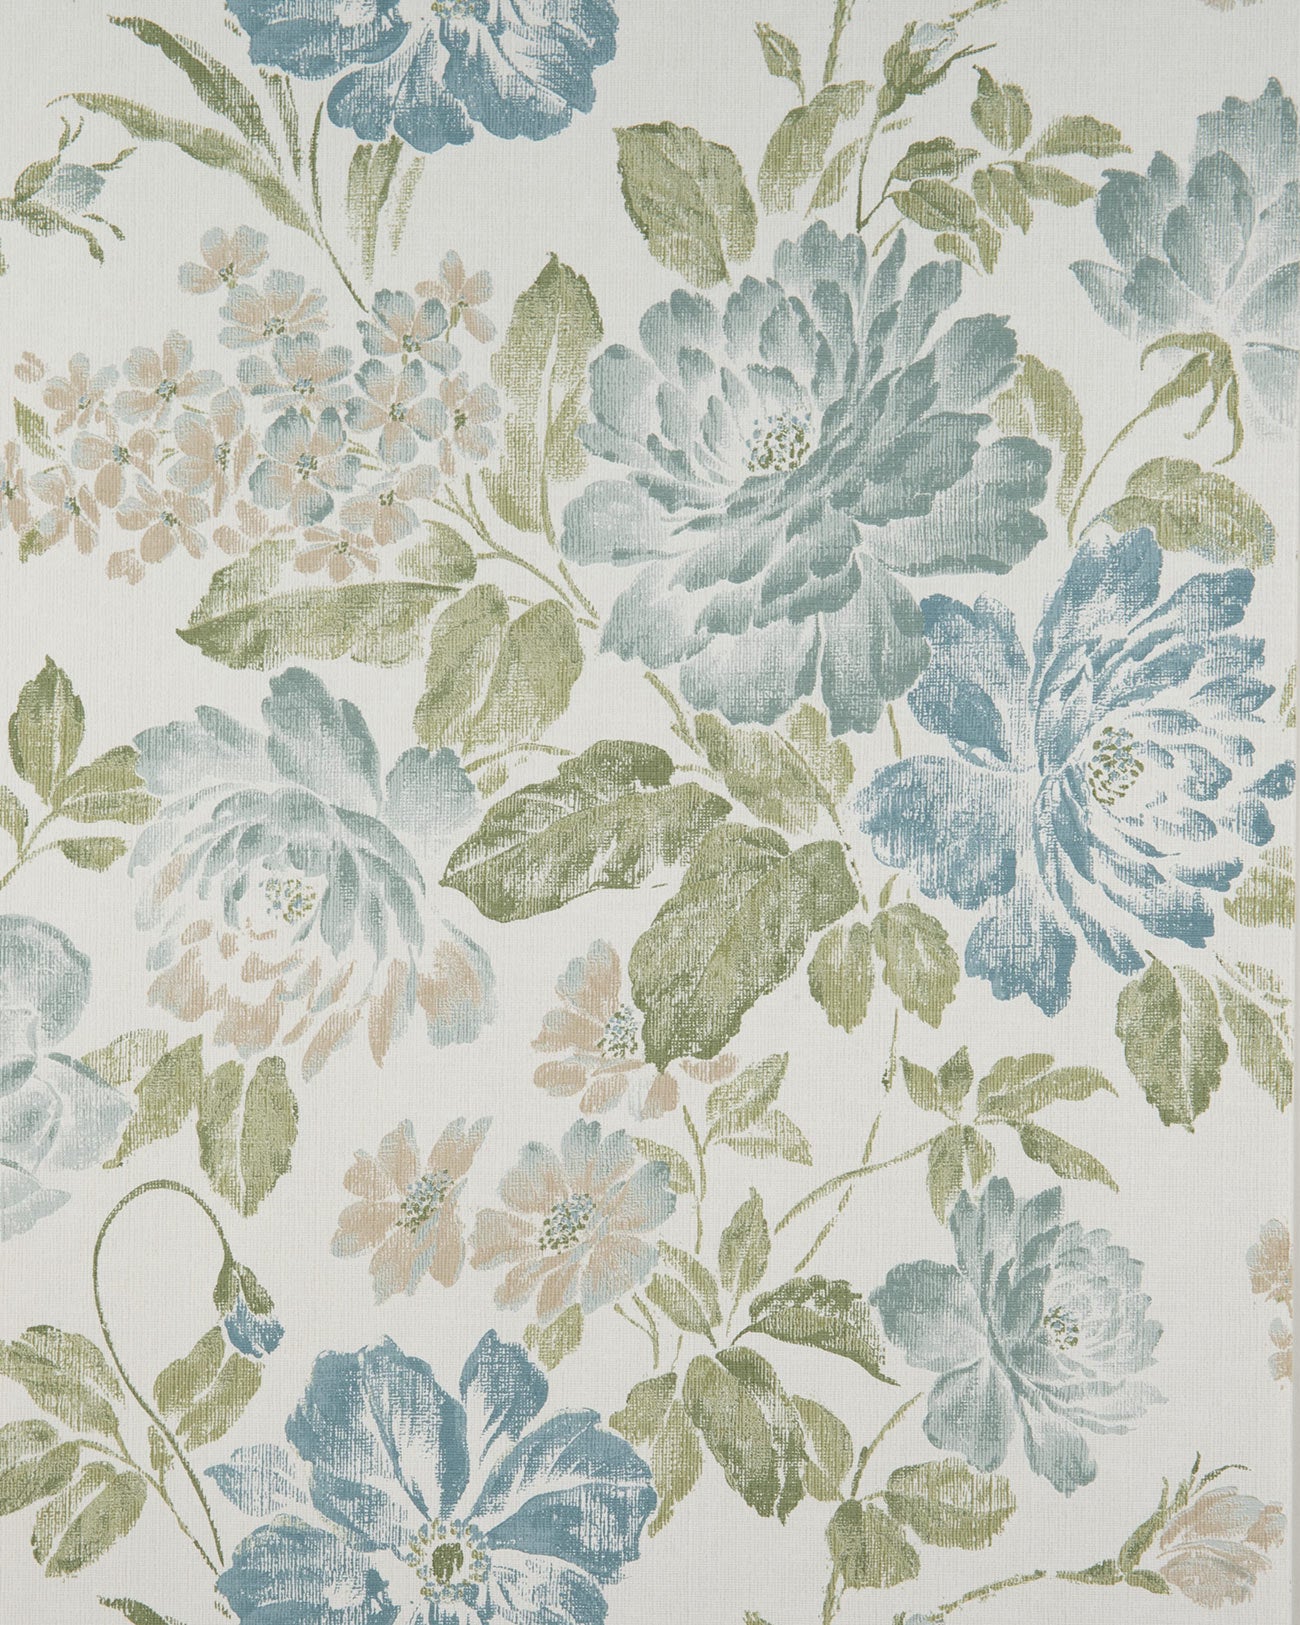 Floral wallpaper Profhome BV919082-DI textured hot embossed non-woven wallpaper with a matt floral design white olive green blue green 5.33 m2